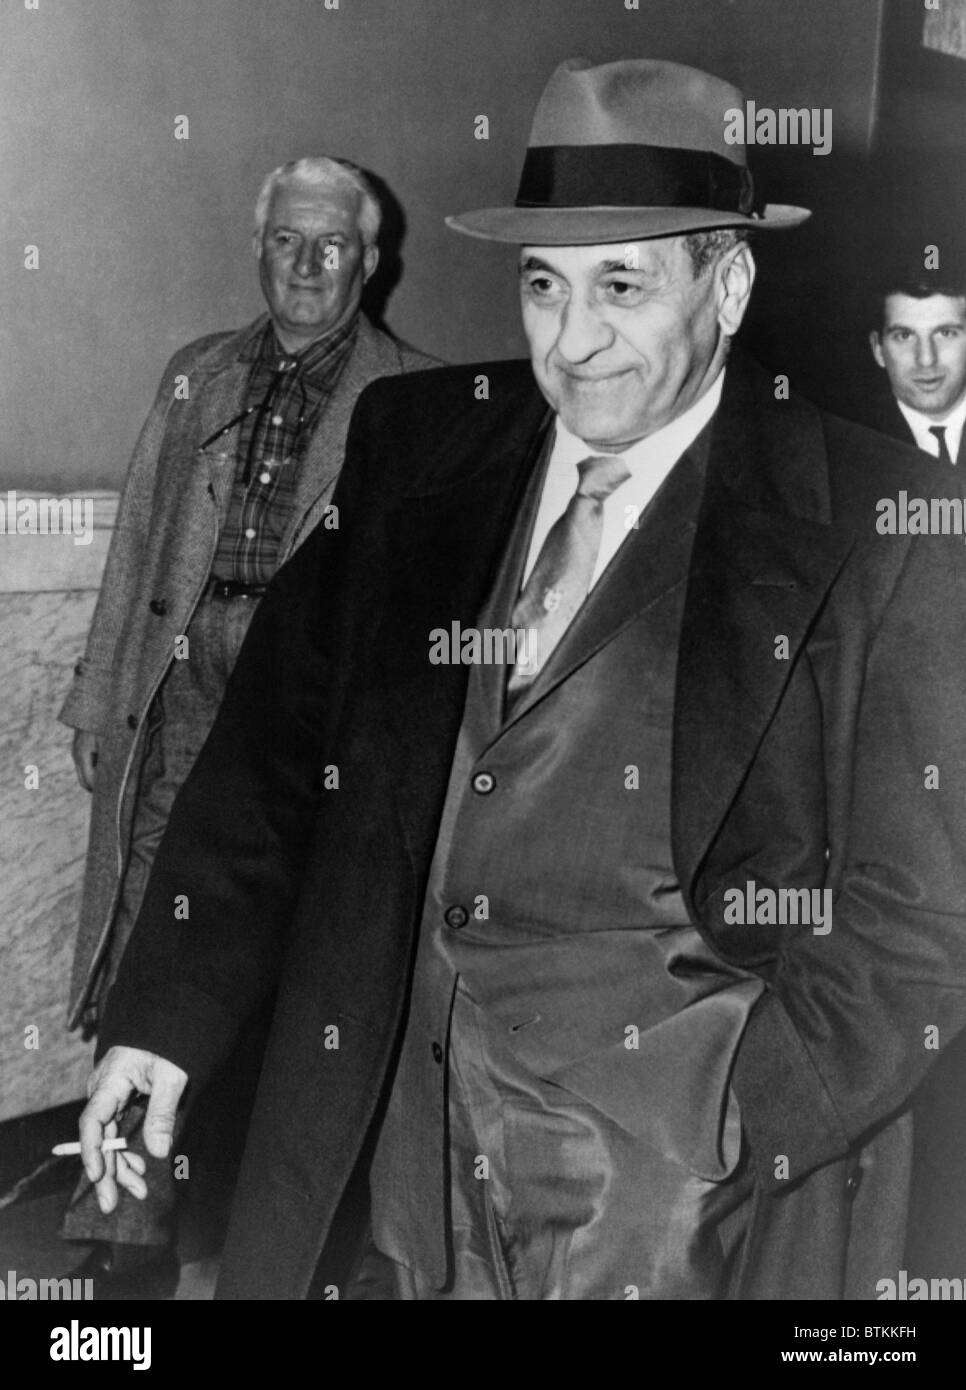 parallel religion Ondartet tumor Tony Accardo, successor of Al Capone as boss of the Chicago mob, leaving  Federal Building in Chicago after his conviction for tax evasion. In spite  of the conviction, Accardo never spent a